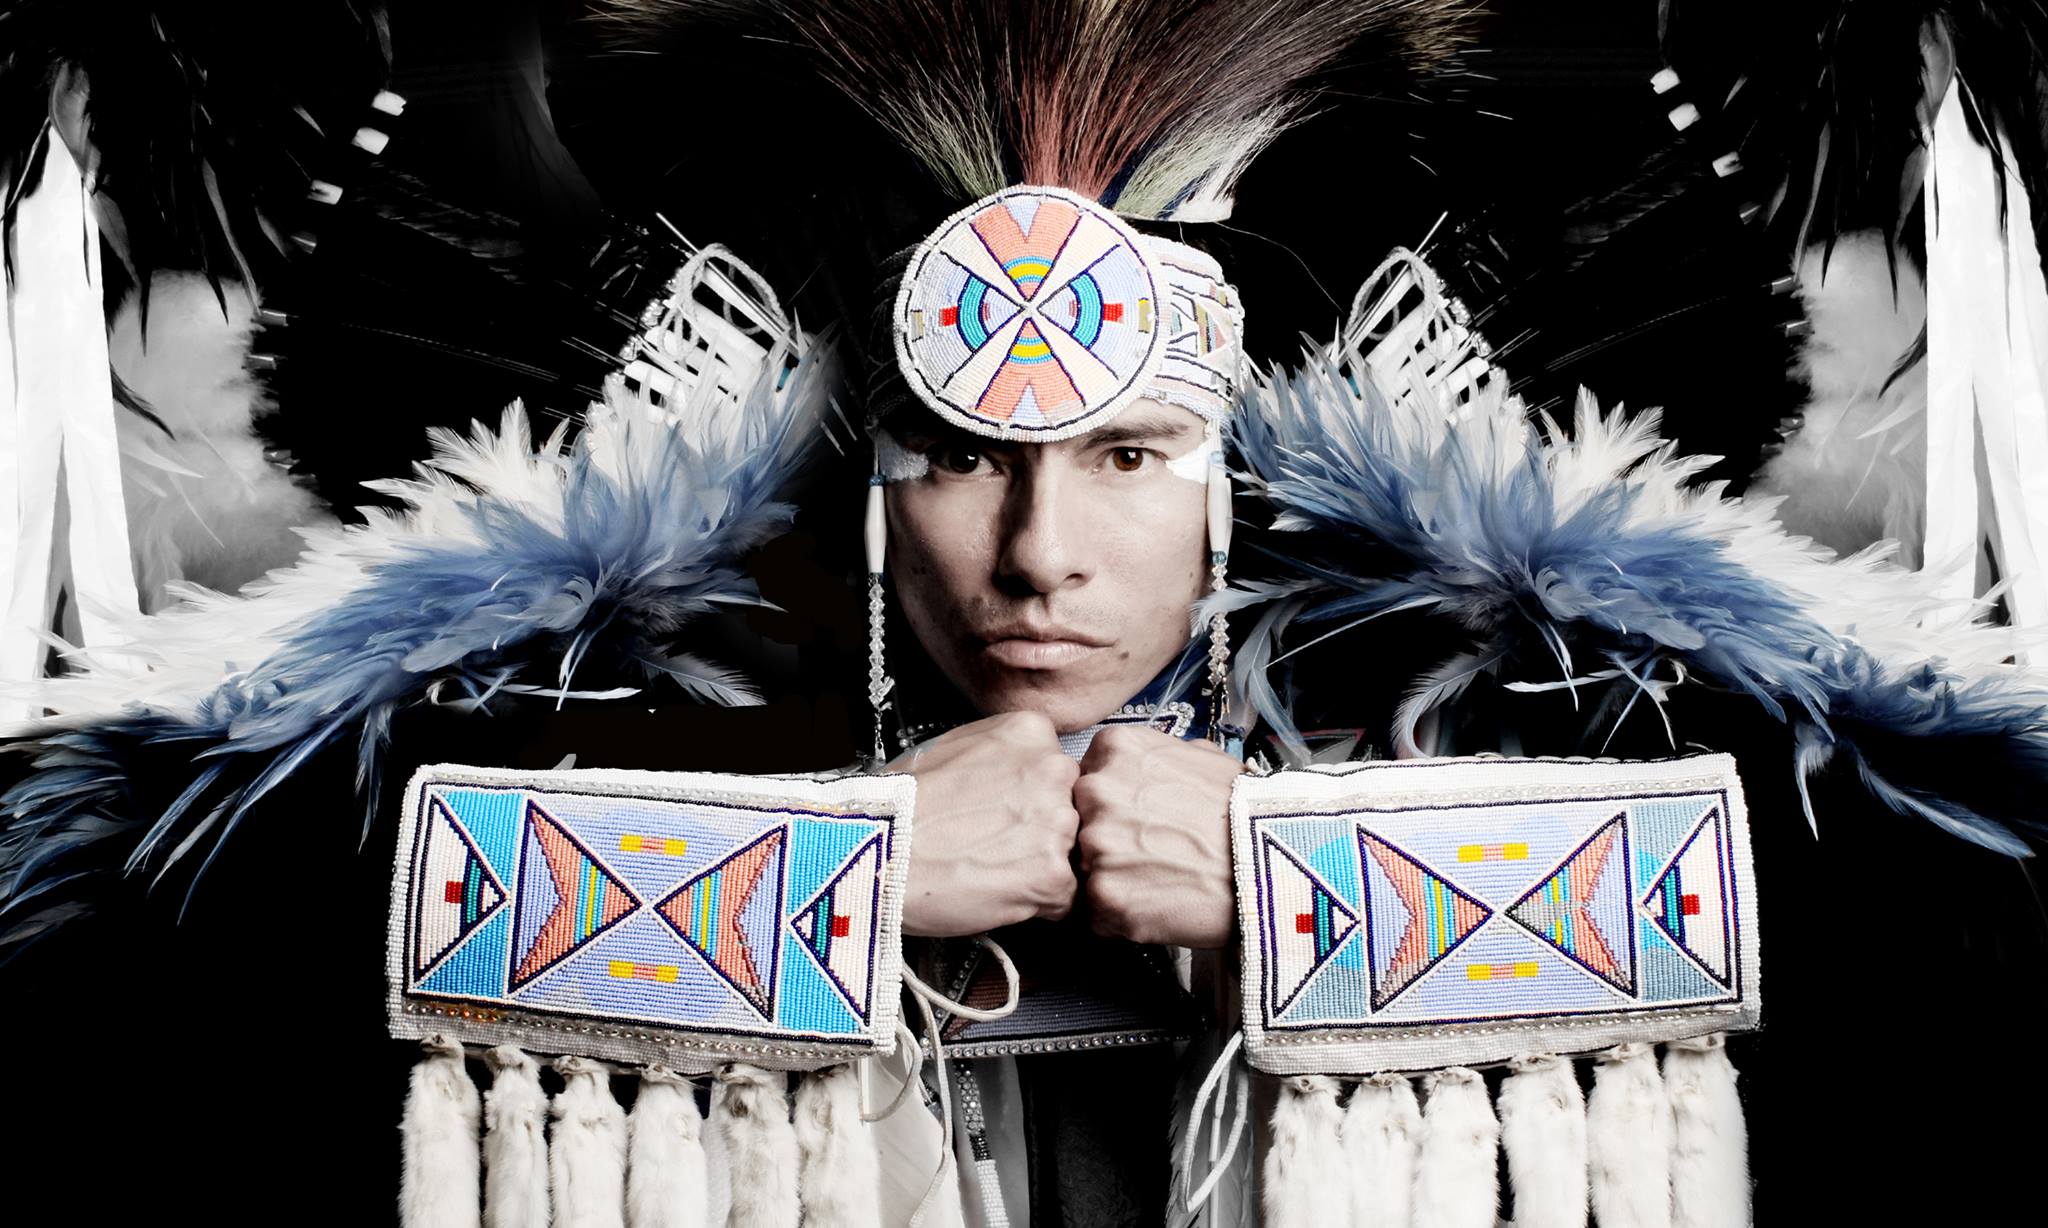 Dancer Apsaalooke and hip hop artist Supaman will perform at the Eiteljorg Museum of American Indians and Western Art in Indianapolis, Indiana on Saturday, August 7.  (Courtesy photo)